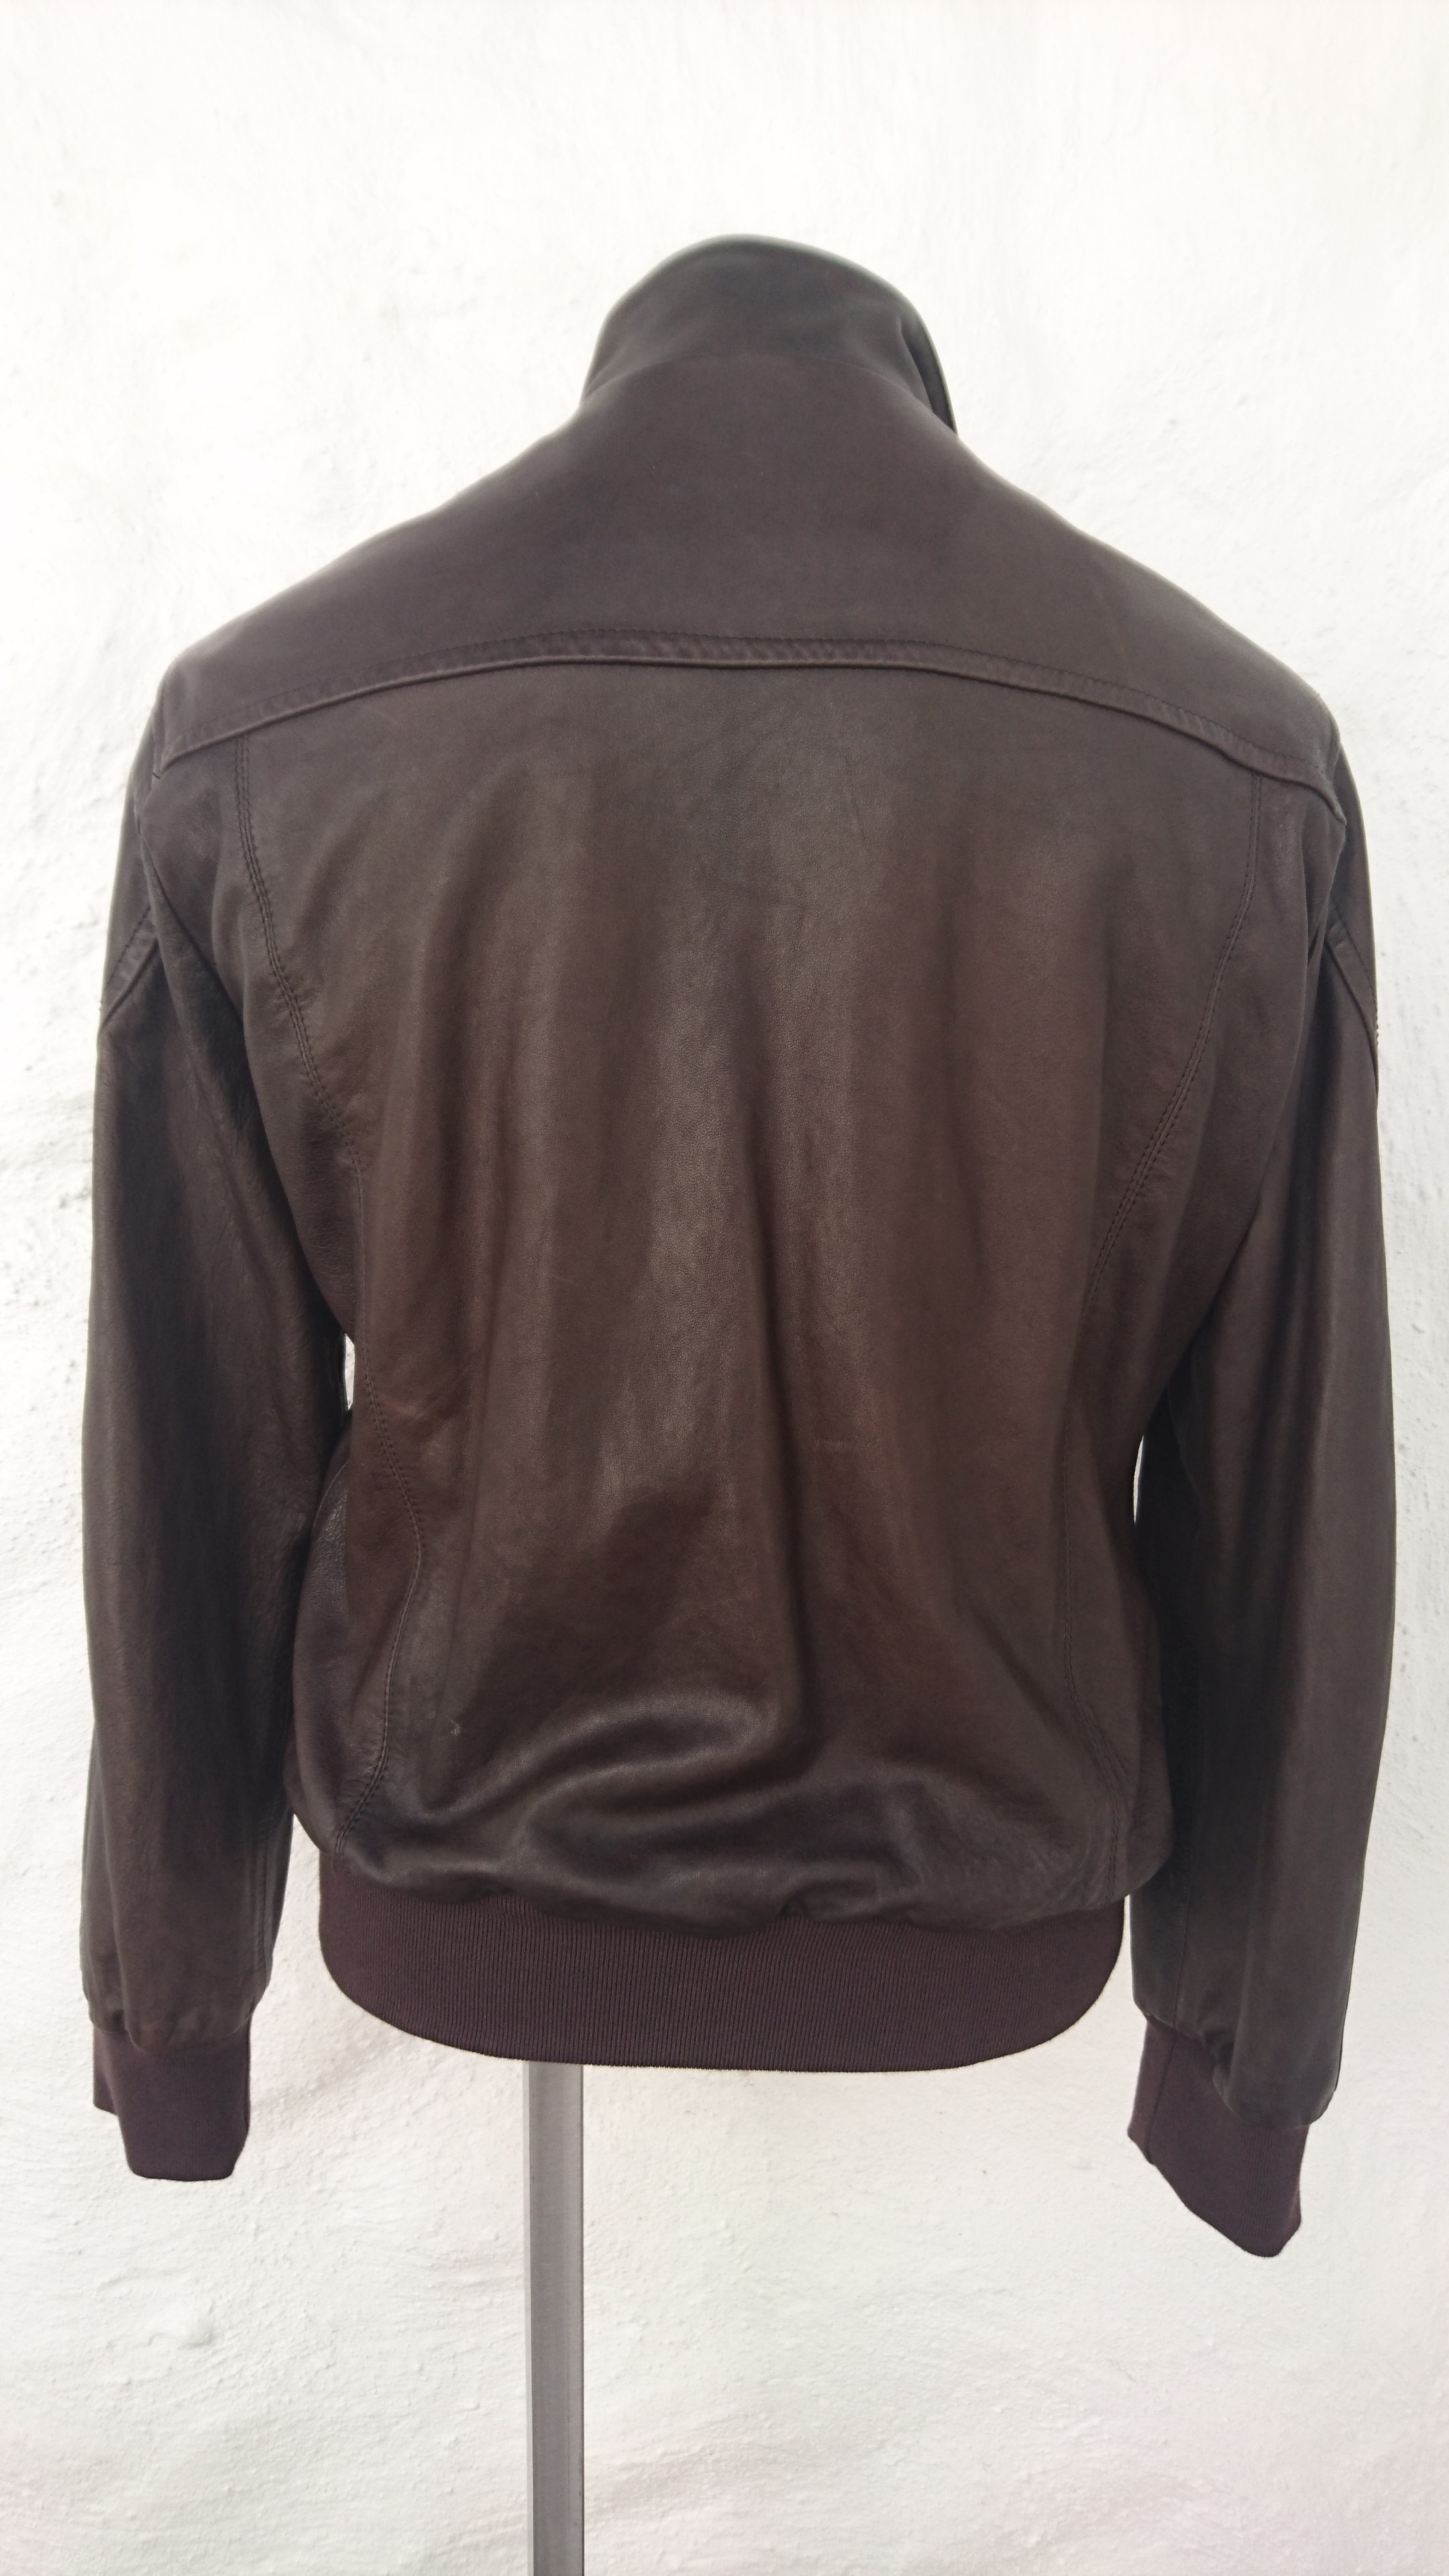 NEW Jacob Cohen Brown Leather Jacket Bomber - Handmade Italy - L Large  $1500 | Styleforum